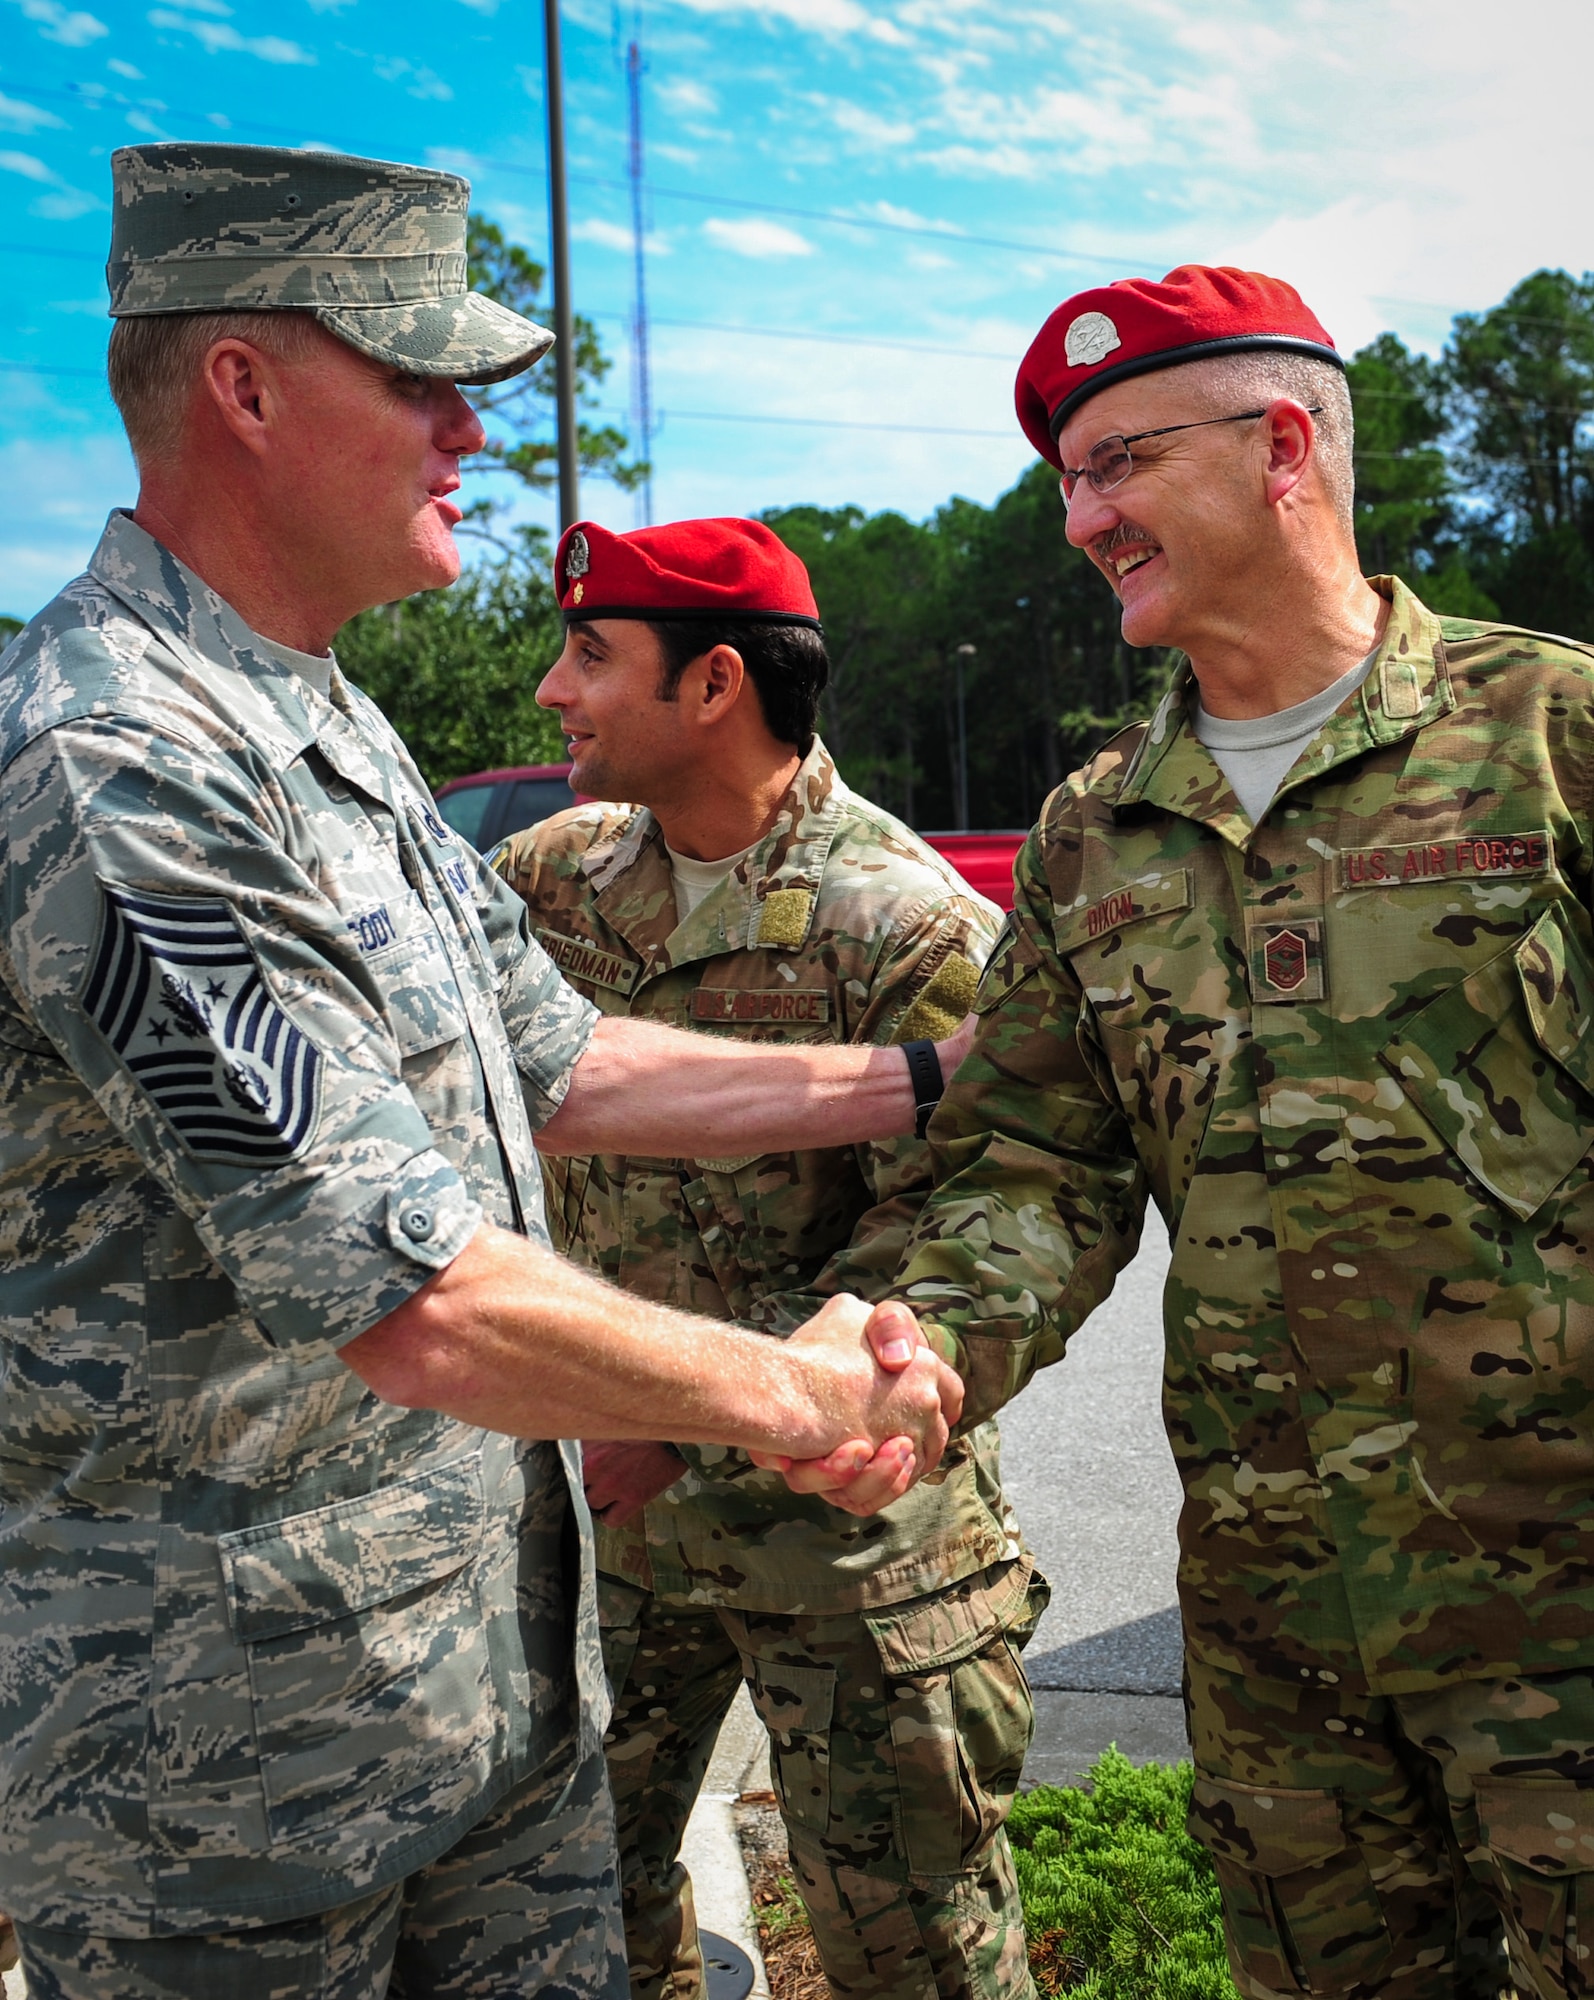 Chief Master Sgt. Bruce Dixon, right, 24th Special Operations Wing command chief, welcomes Chief Master Sgt. of the Air Force James A. Cody during a tour on Hurlburt Field, Fla., Sept. 29, 2015. (U.S. Air Force photo by Senior Airman Meagan Schutter)